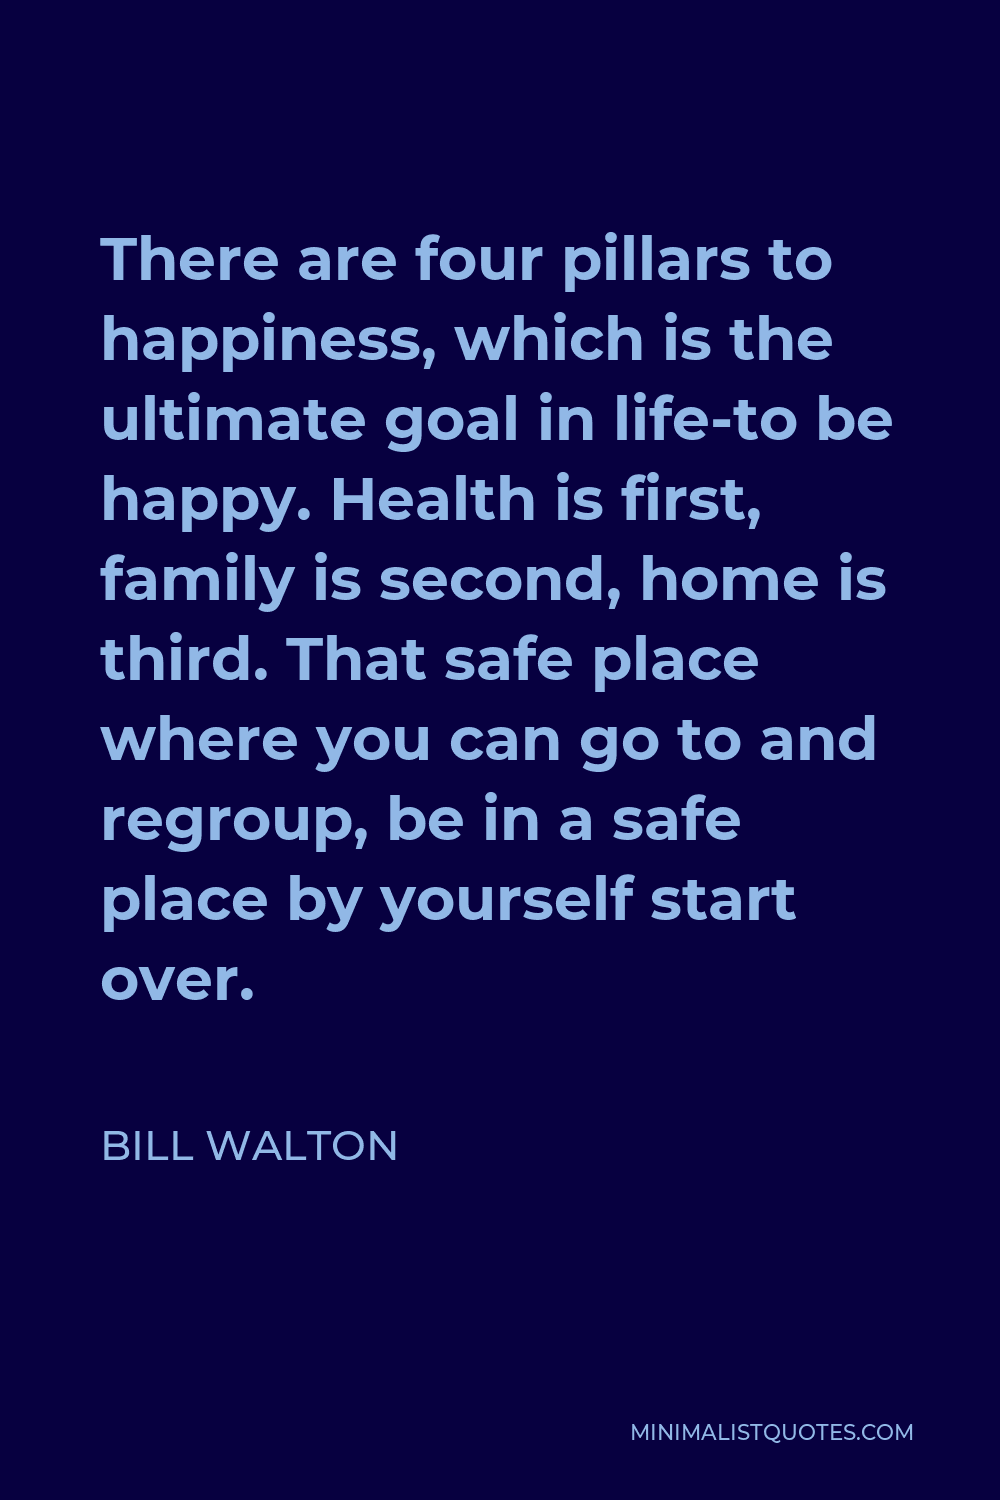 Bill Walton Quote - There are four pillars to happiness, which is the ultimate goal in life-to be happy. Health is first, family is second, home is third. That safe place where you can go to and regroup, be in a safe place by yourself start over.